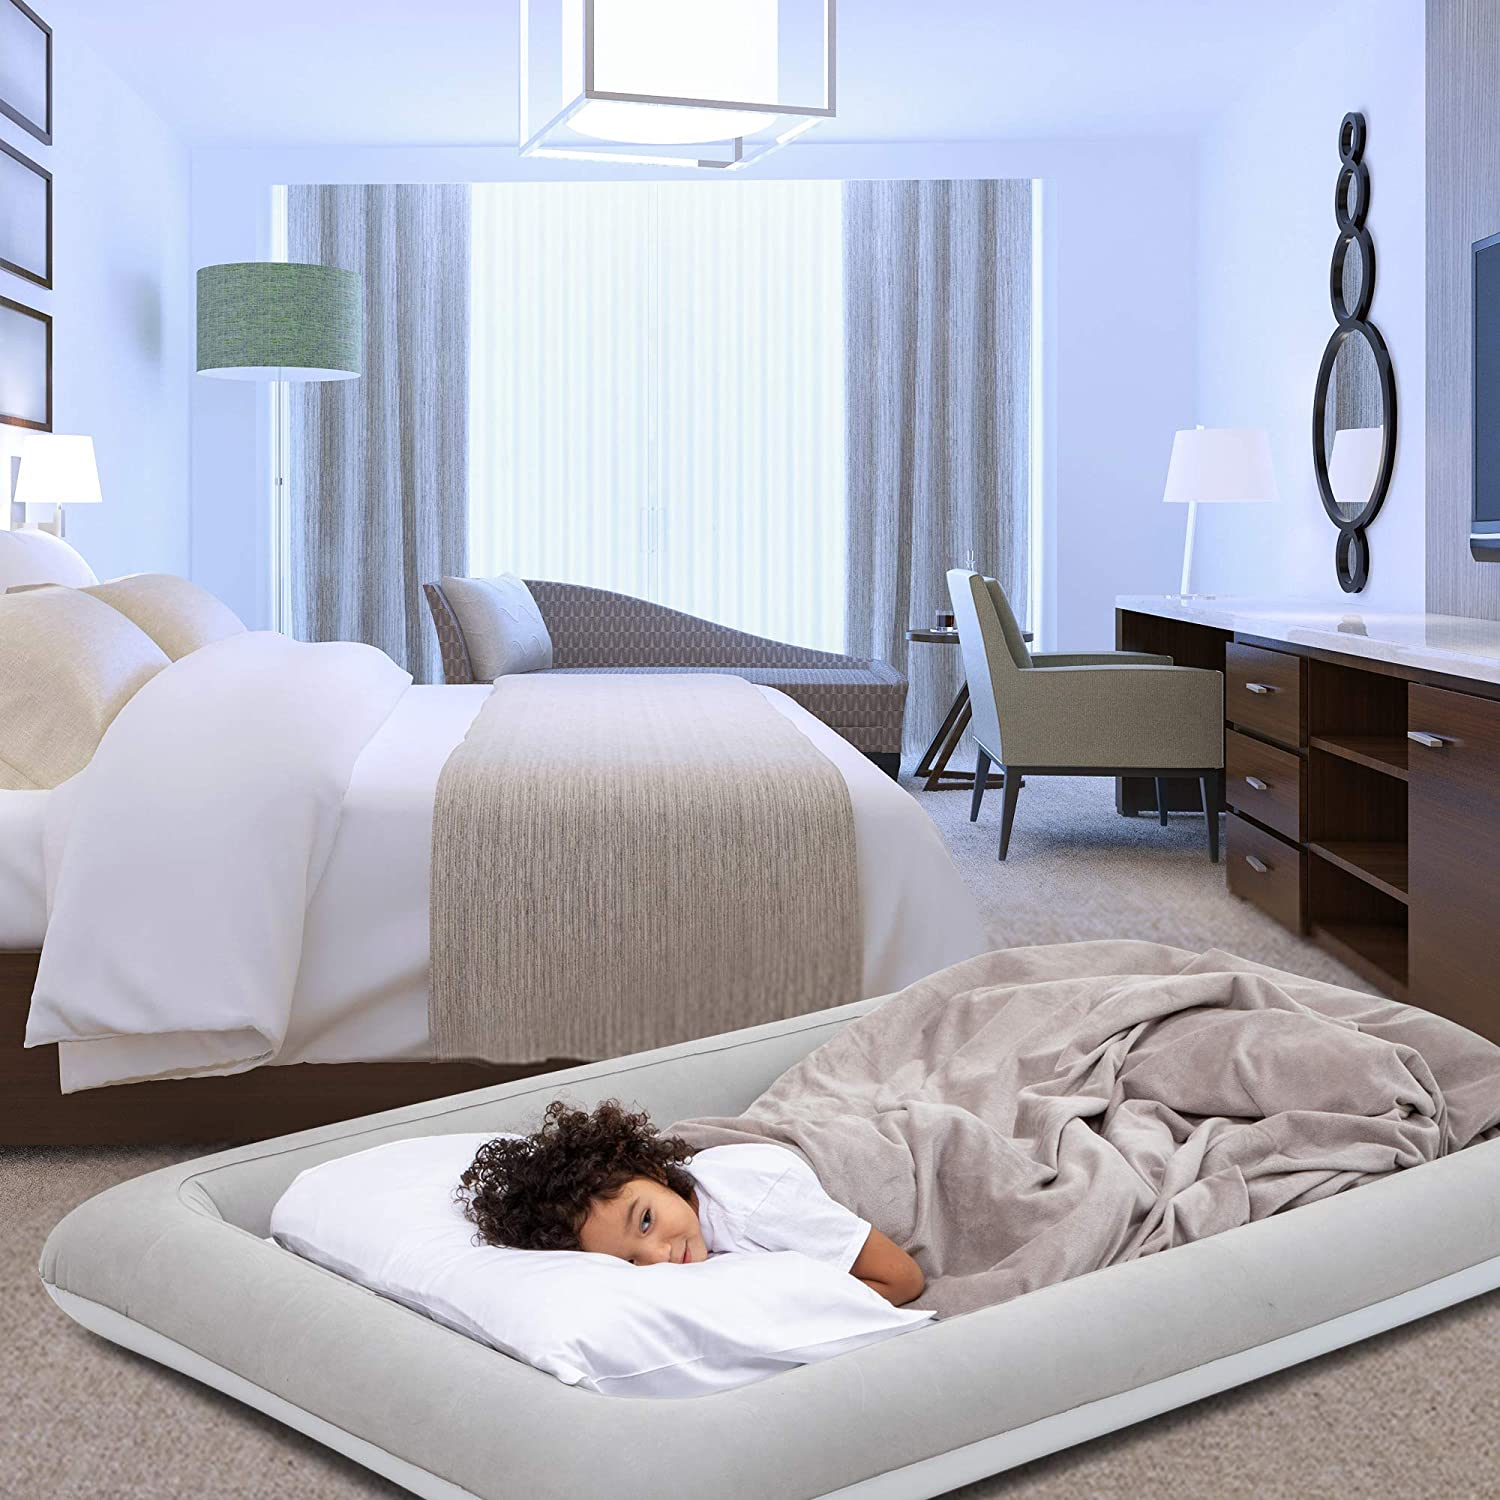 Toddler safety air mattresses are specially designed for children to sleep safety in a temporary bed